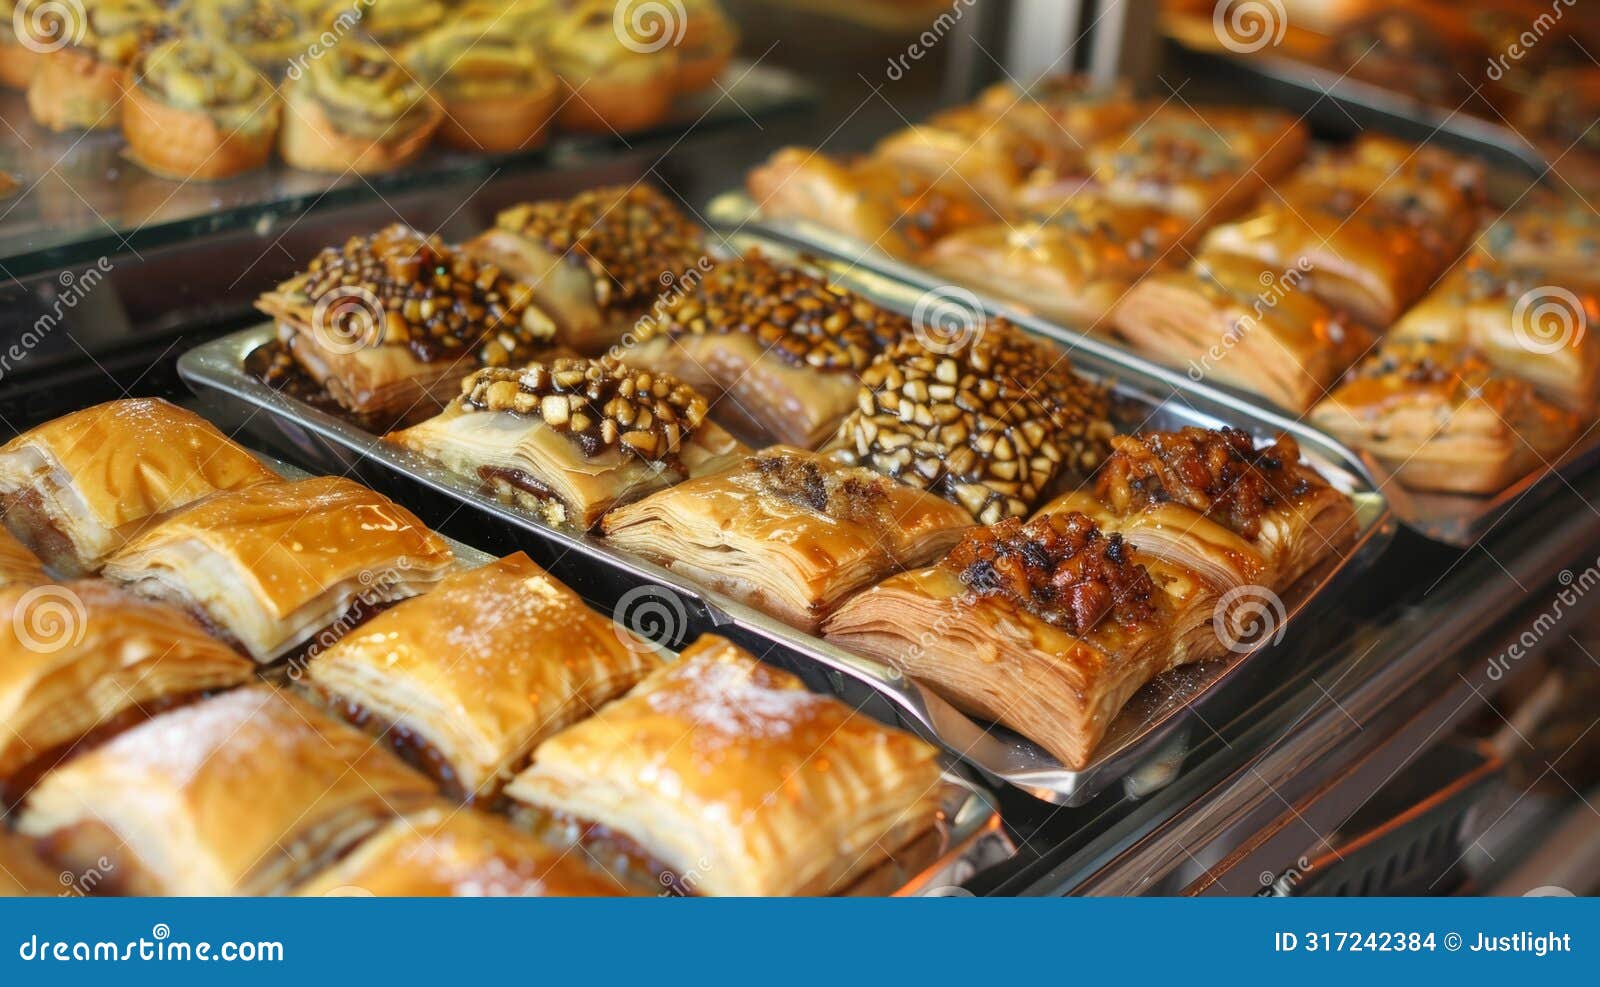 traditional pastries such as baklava and maamoul are sold in colorful markets and local bakeries tempting passersby with